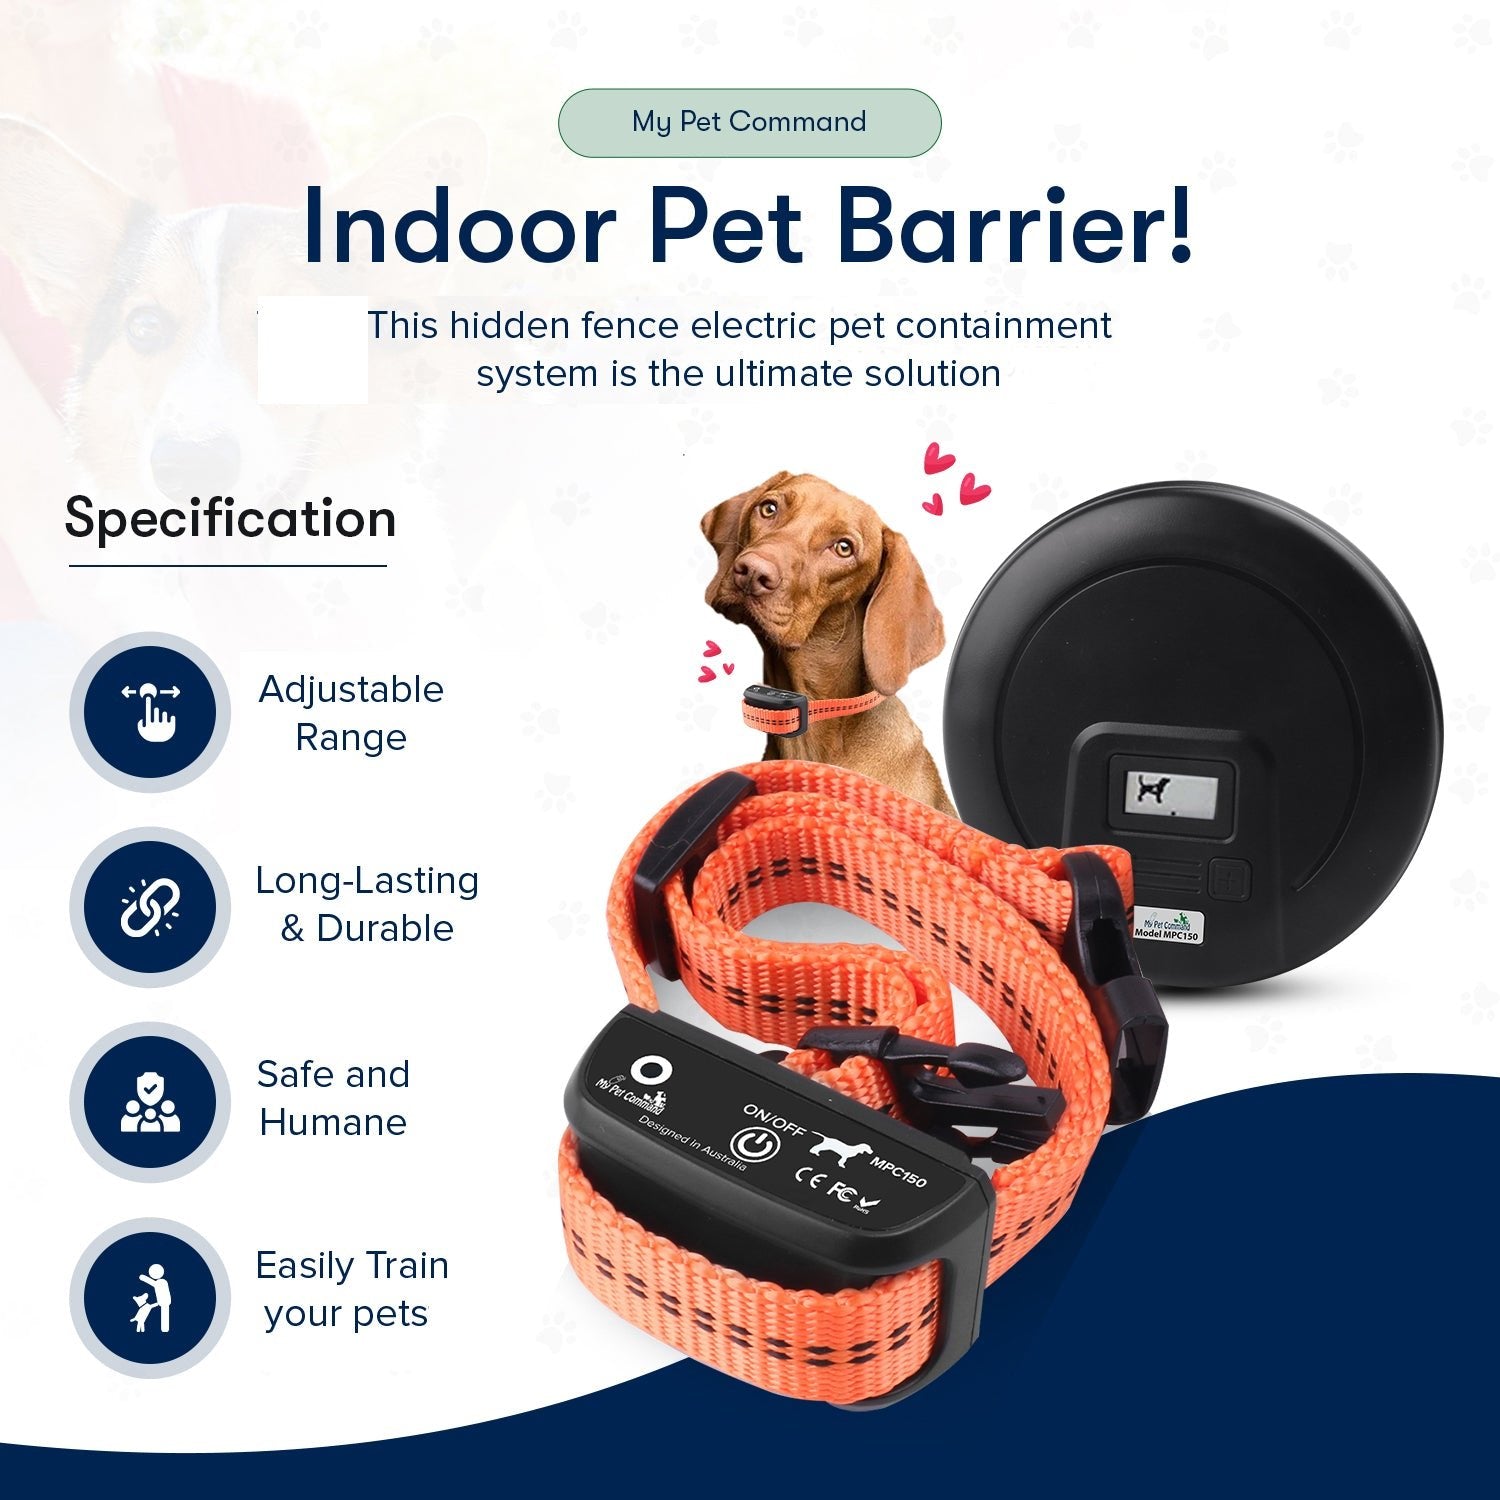 My Pet Command, Indoor Pet Barrier with Adjustable Range, Static and Tone Correction, Hidden Fence for Dogs - My Pet Command